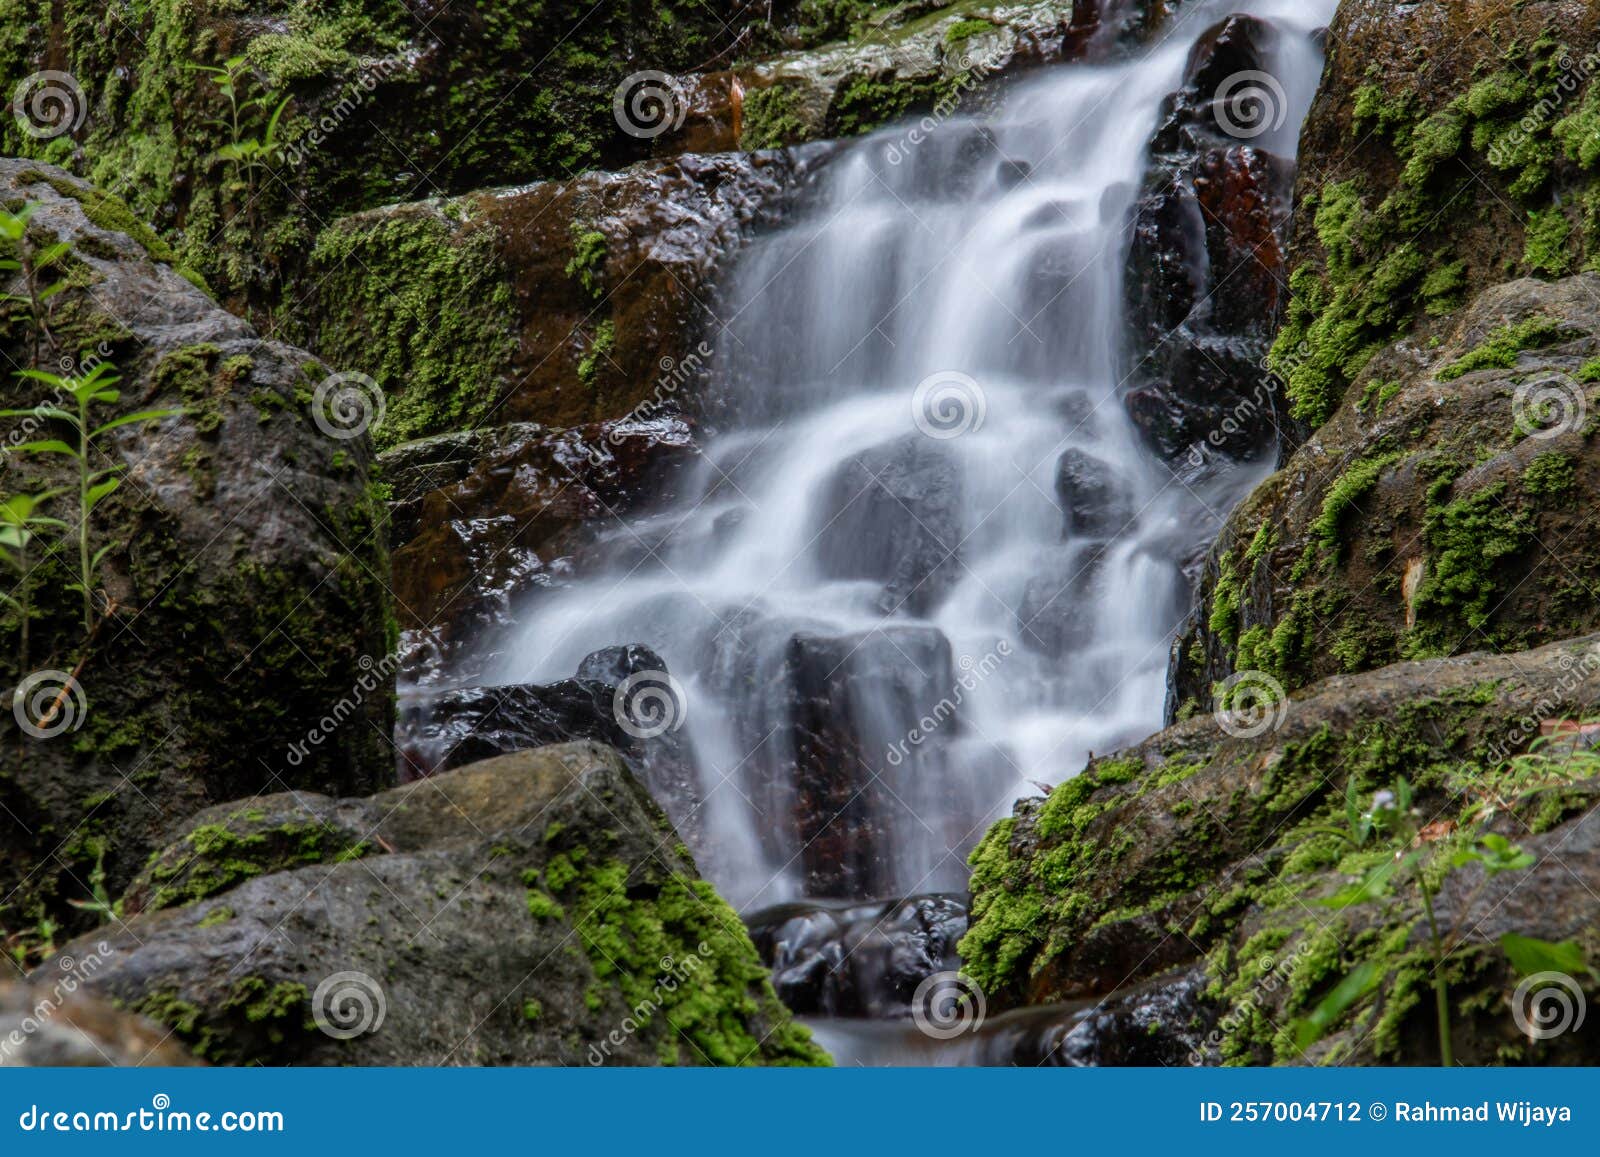 The Water Flows Through The Mossy Rock Like A Small Waterfall Stock